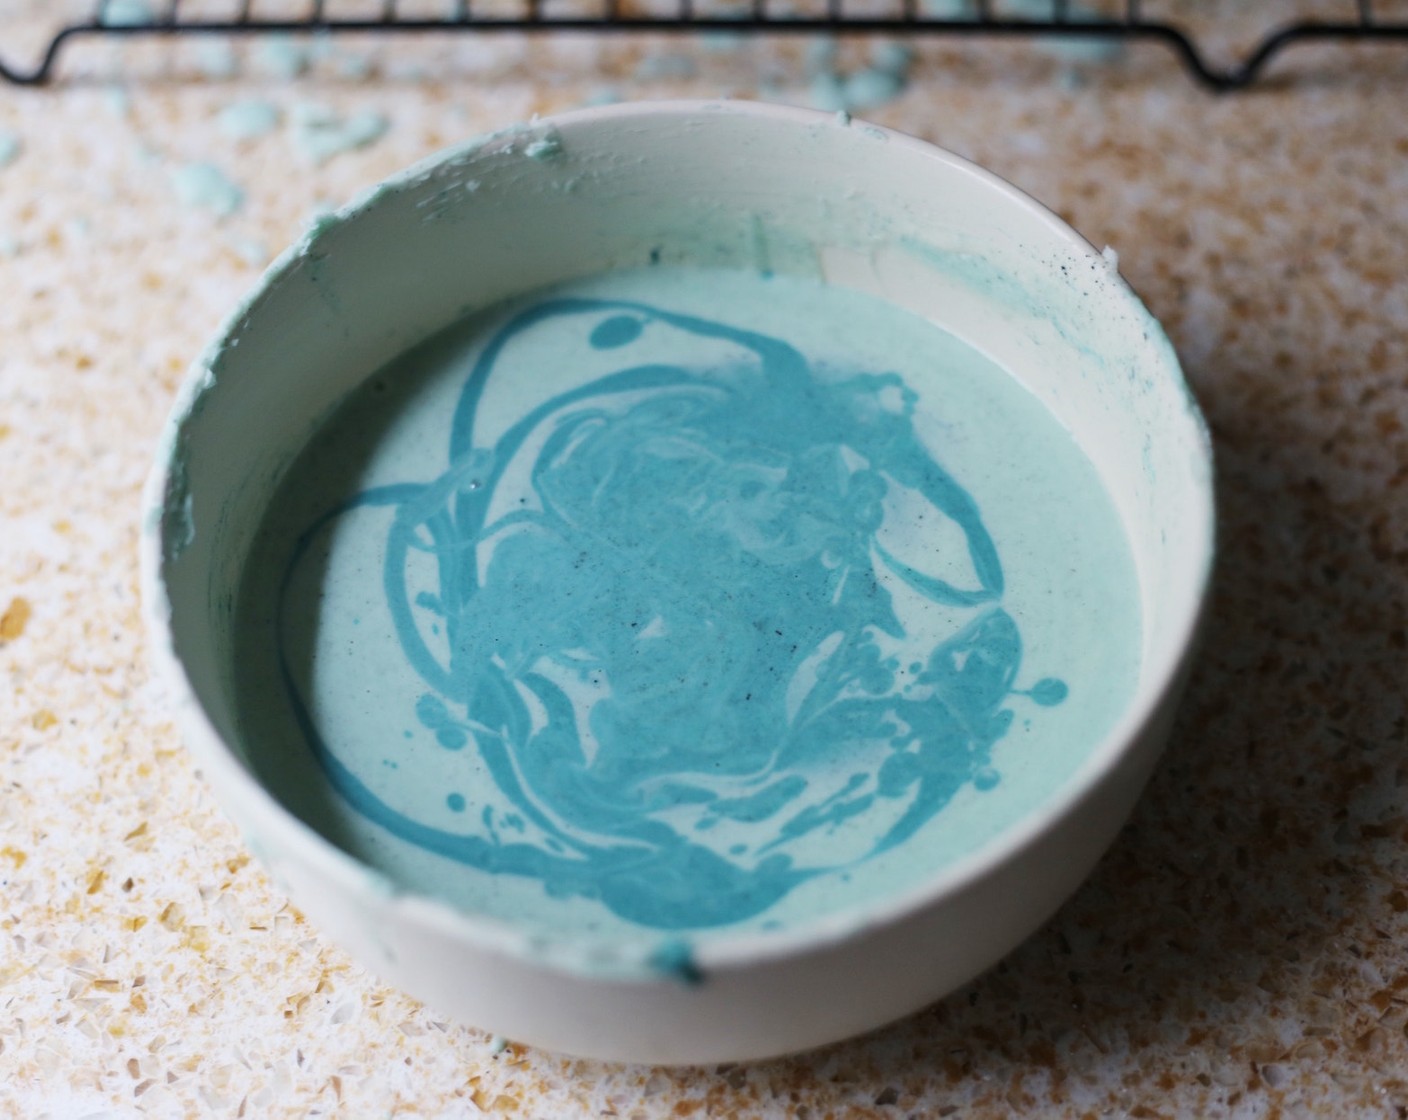 step 9 You might need to melt the chocolate again, which will allow you to tint half of it a darker shade of blue. Use this to coat dip the patties again to obtain a marble effect.